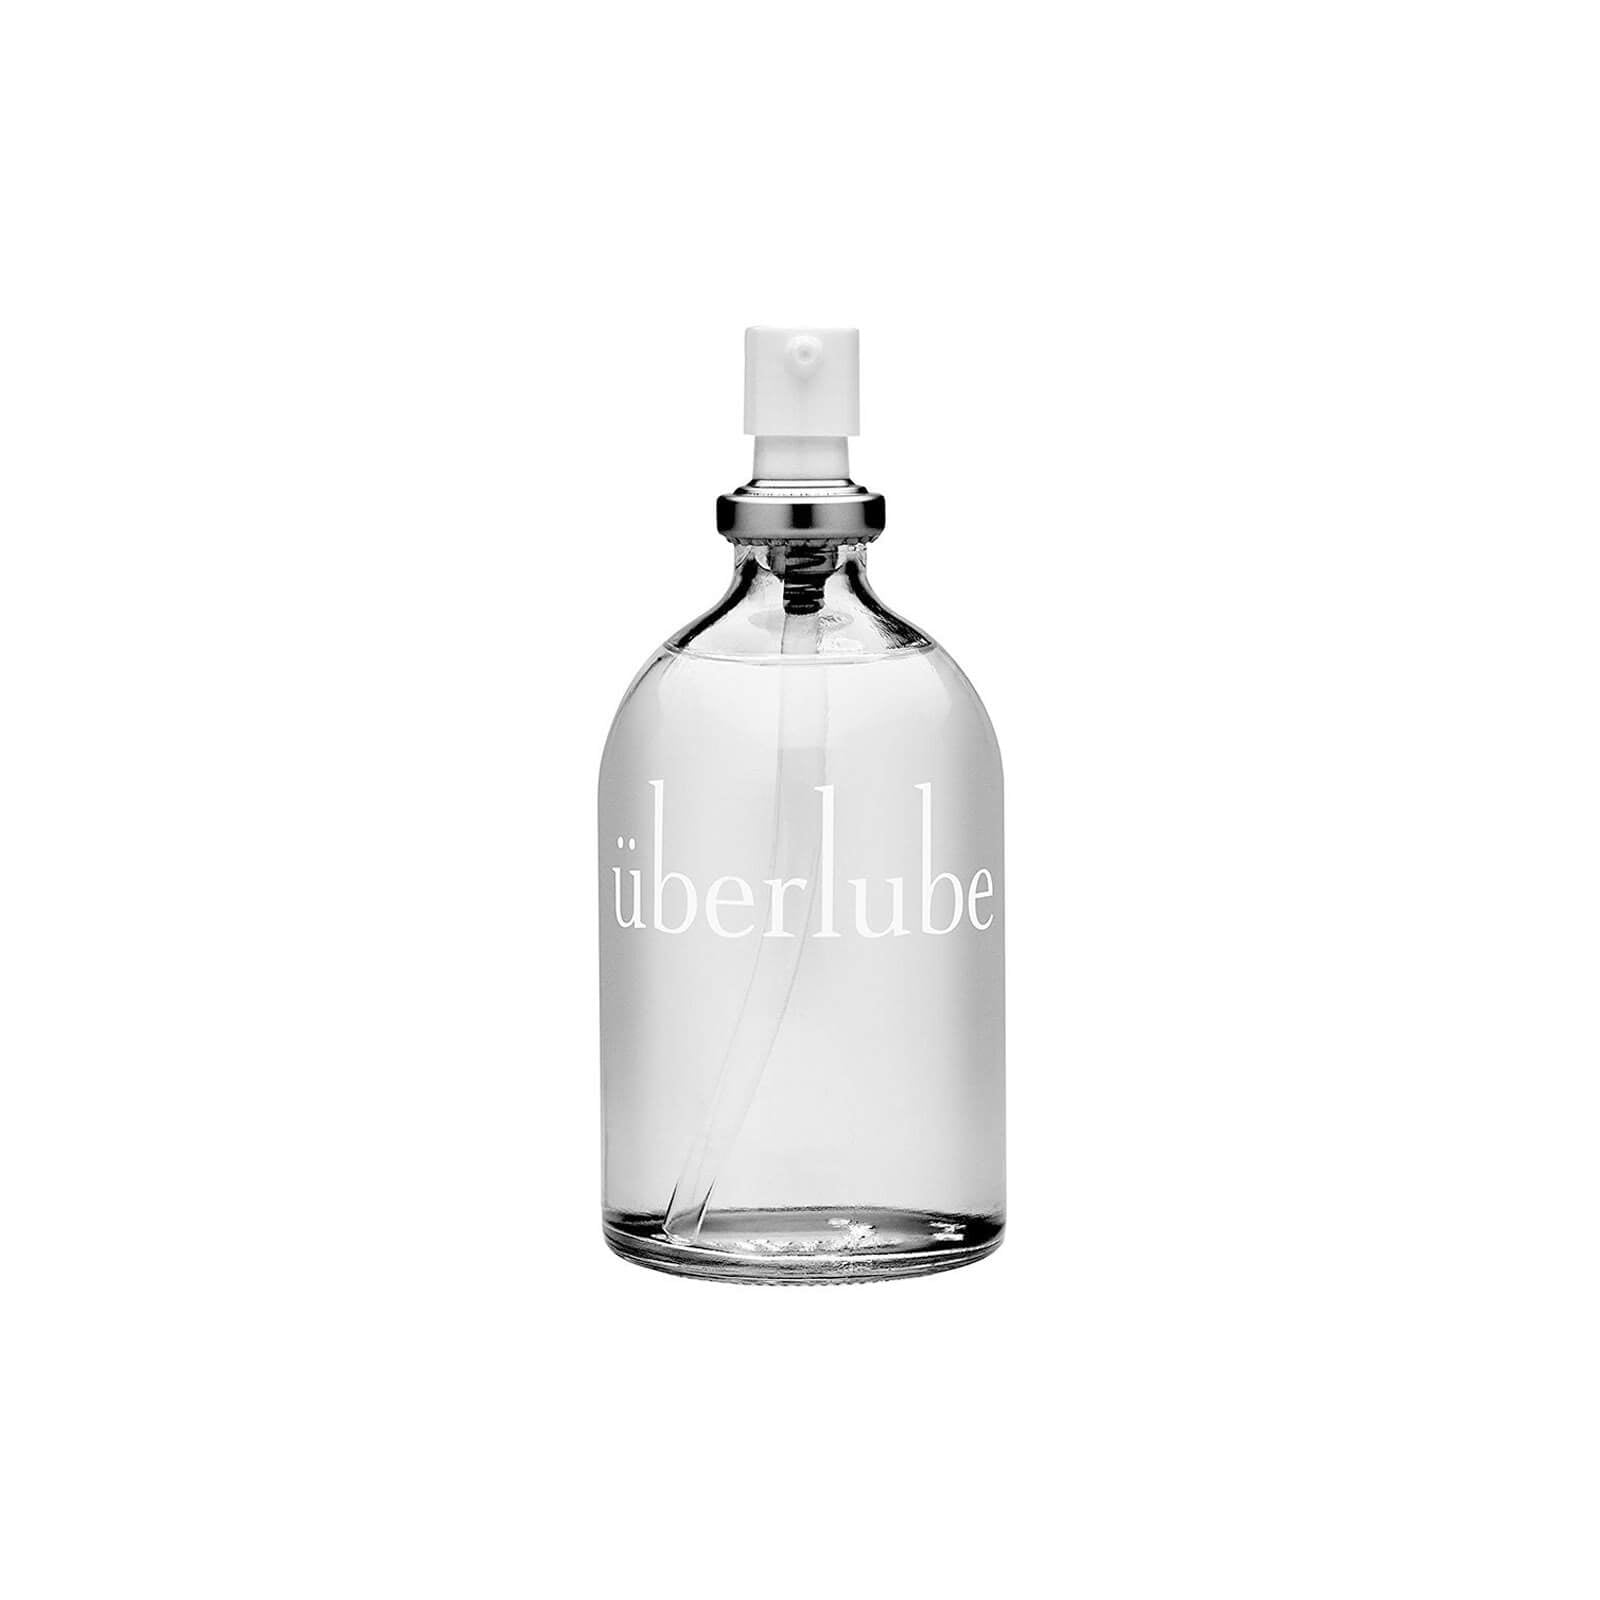 Bottle of überlube vegan silicone-based lubricant in a glass bottle Nudie Co